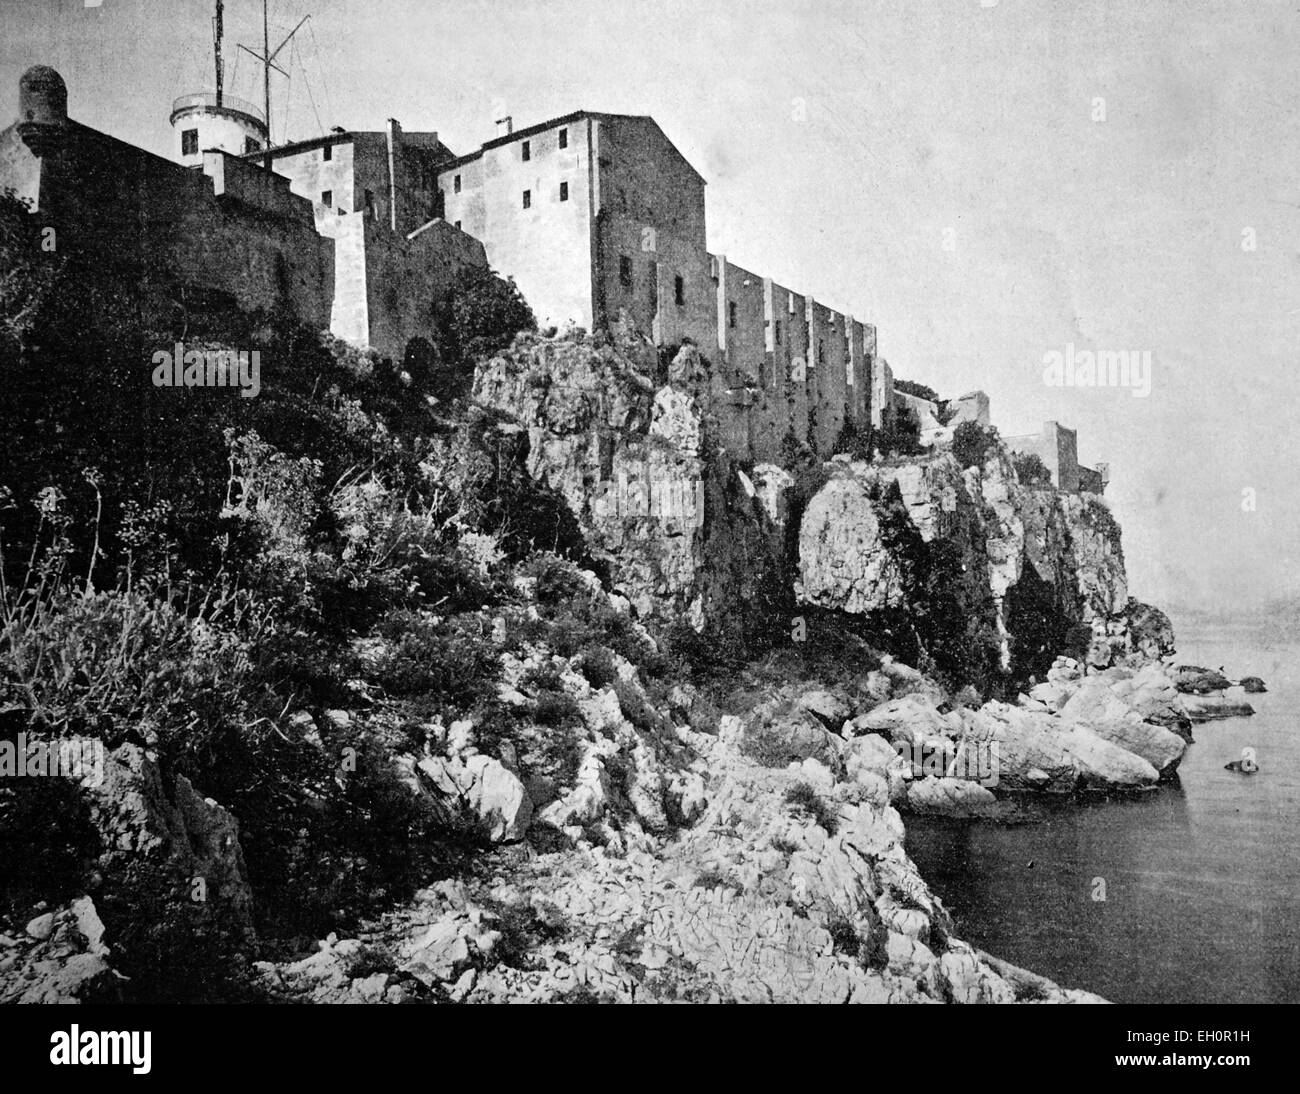 Early autotype of the island of the Ile Sainte-Marguerite, France, historical photo, 1884 Stock Photo